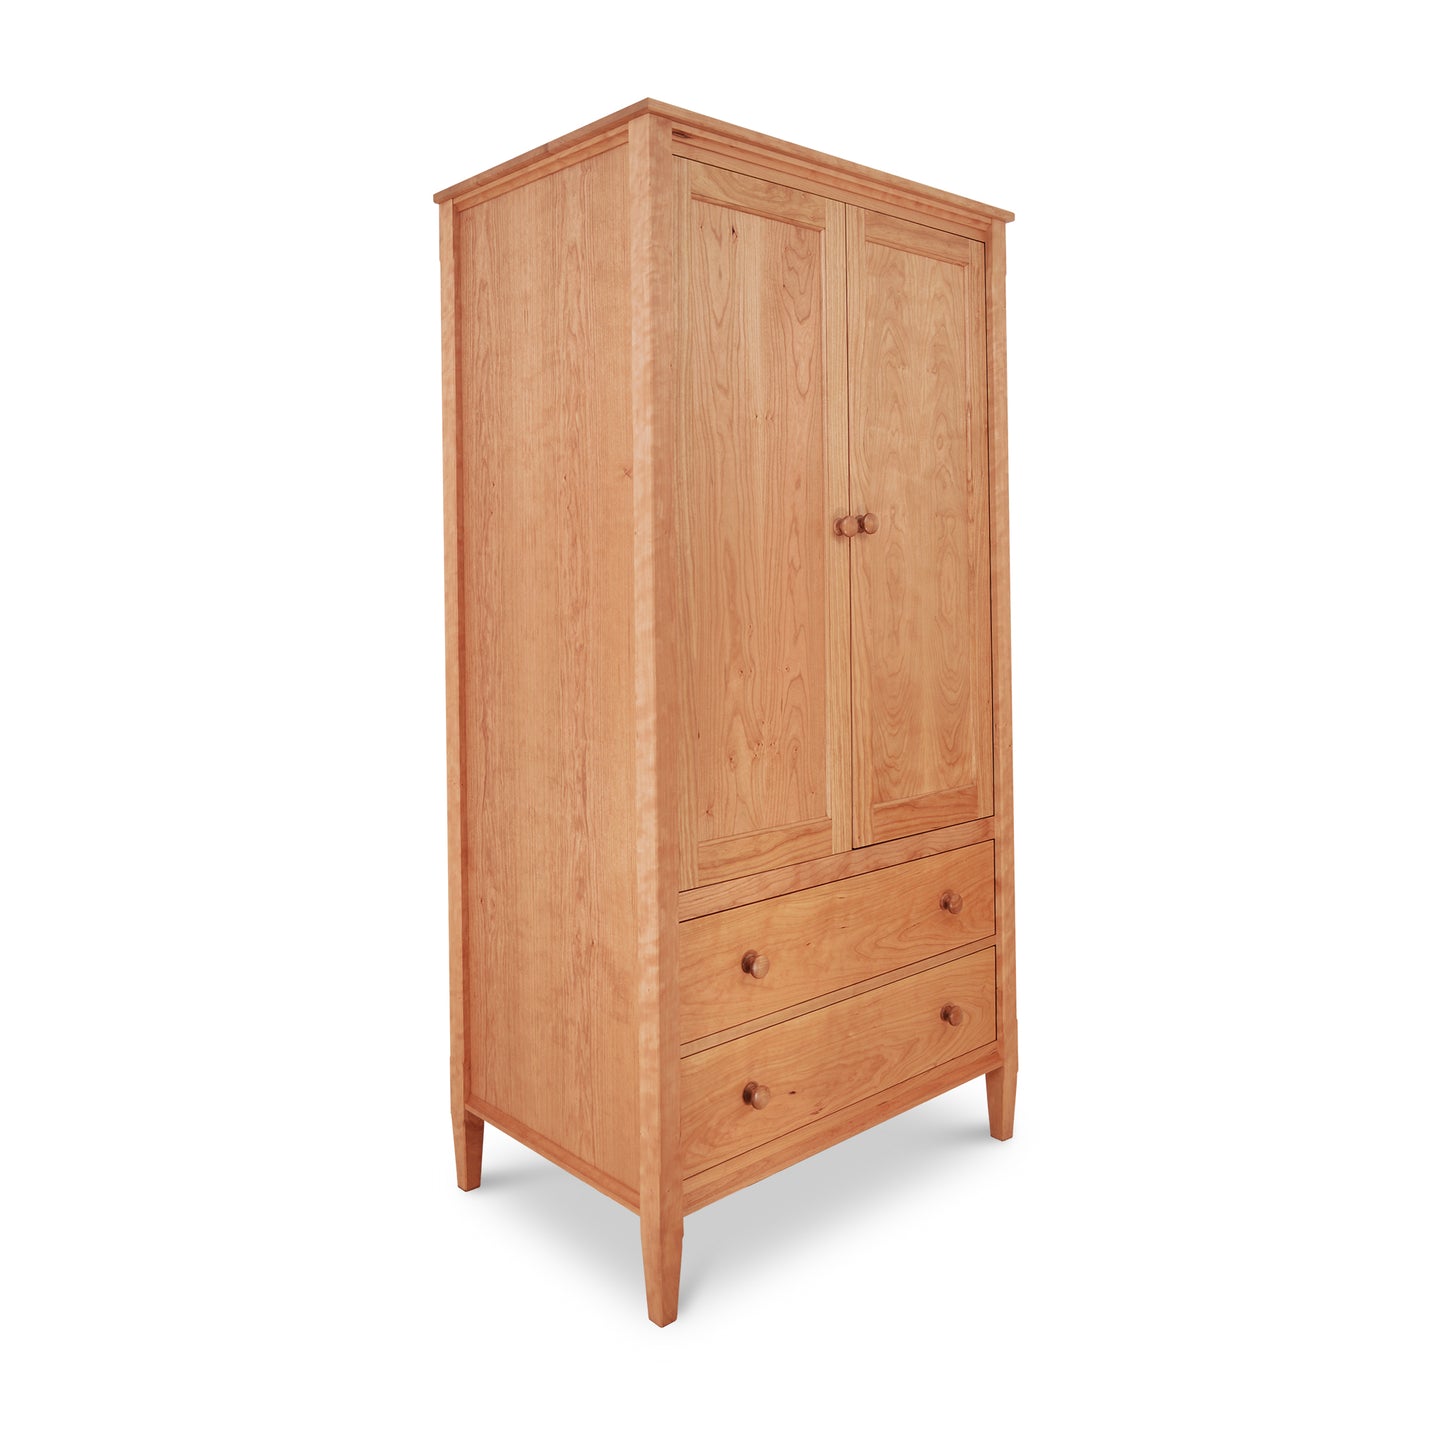 A Maple Corner Woodworks Vermont Shaker Armoire crafted from solid wood, featuring two doors on top and two drawers at the bottom, standing against a white background.